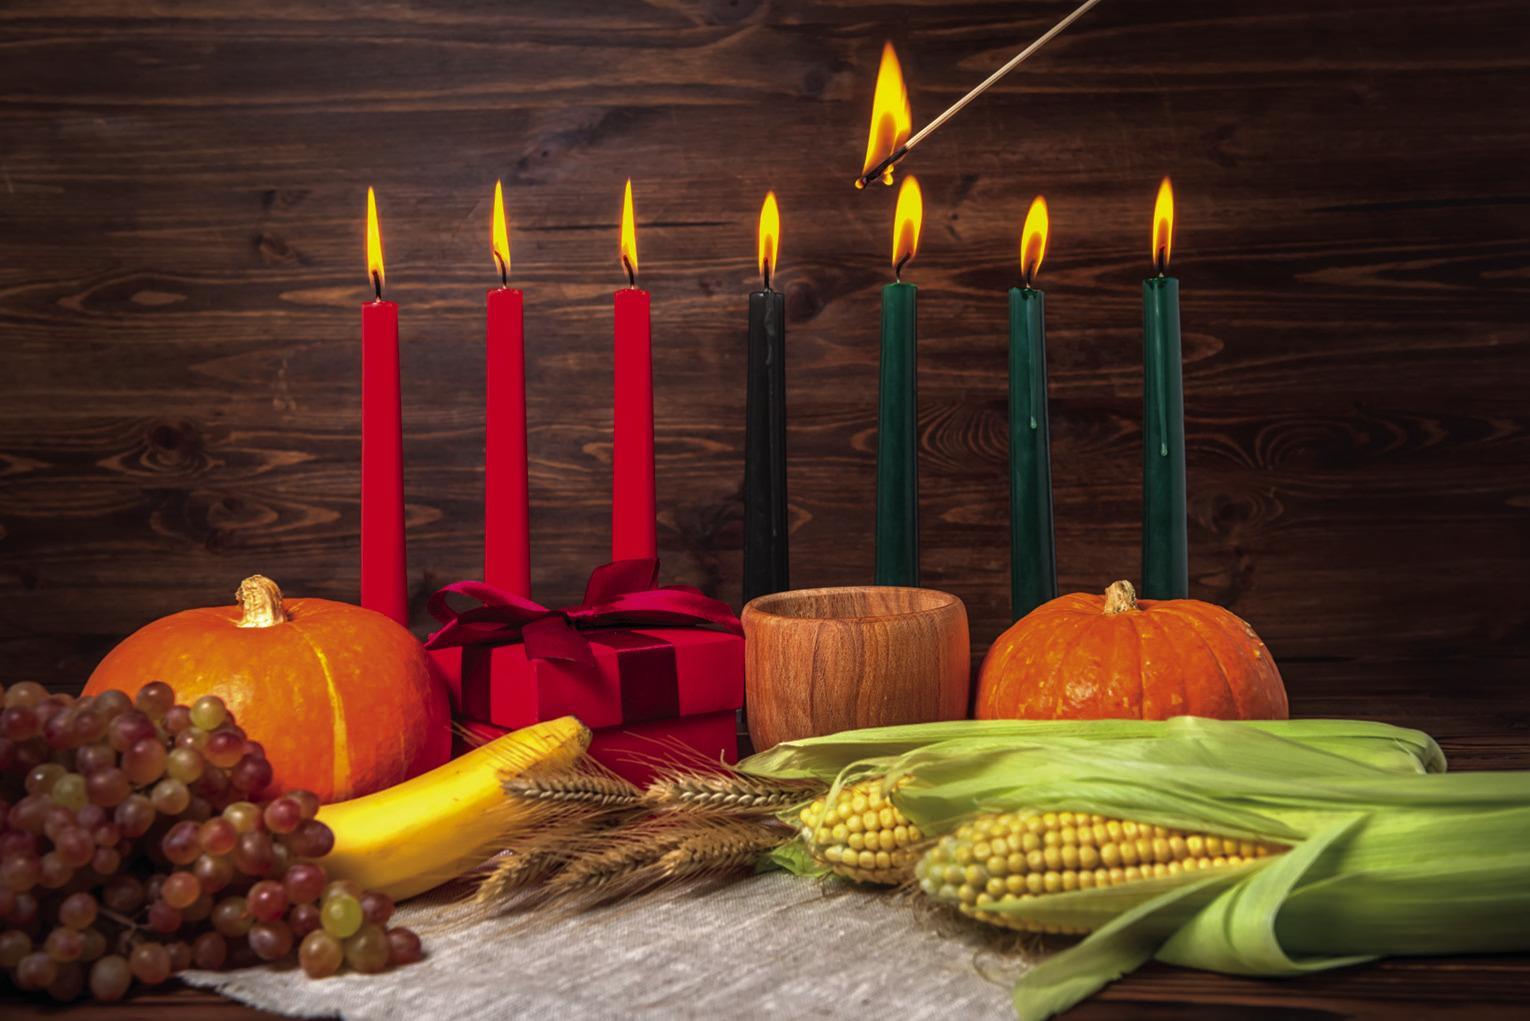 Traditional foods add something special to Kwanzaa celebrations